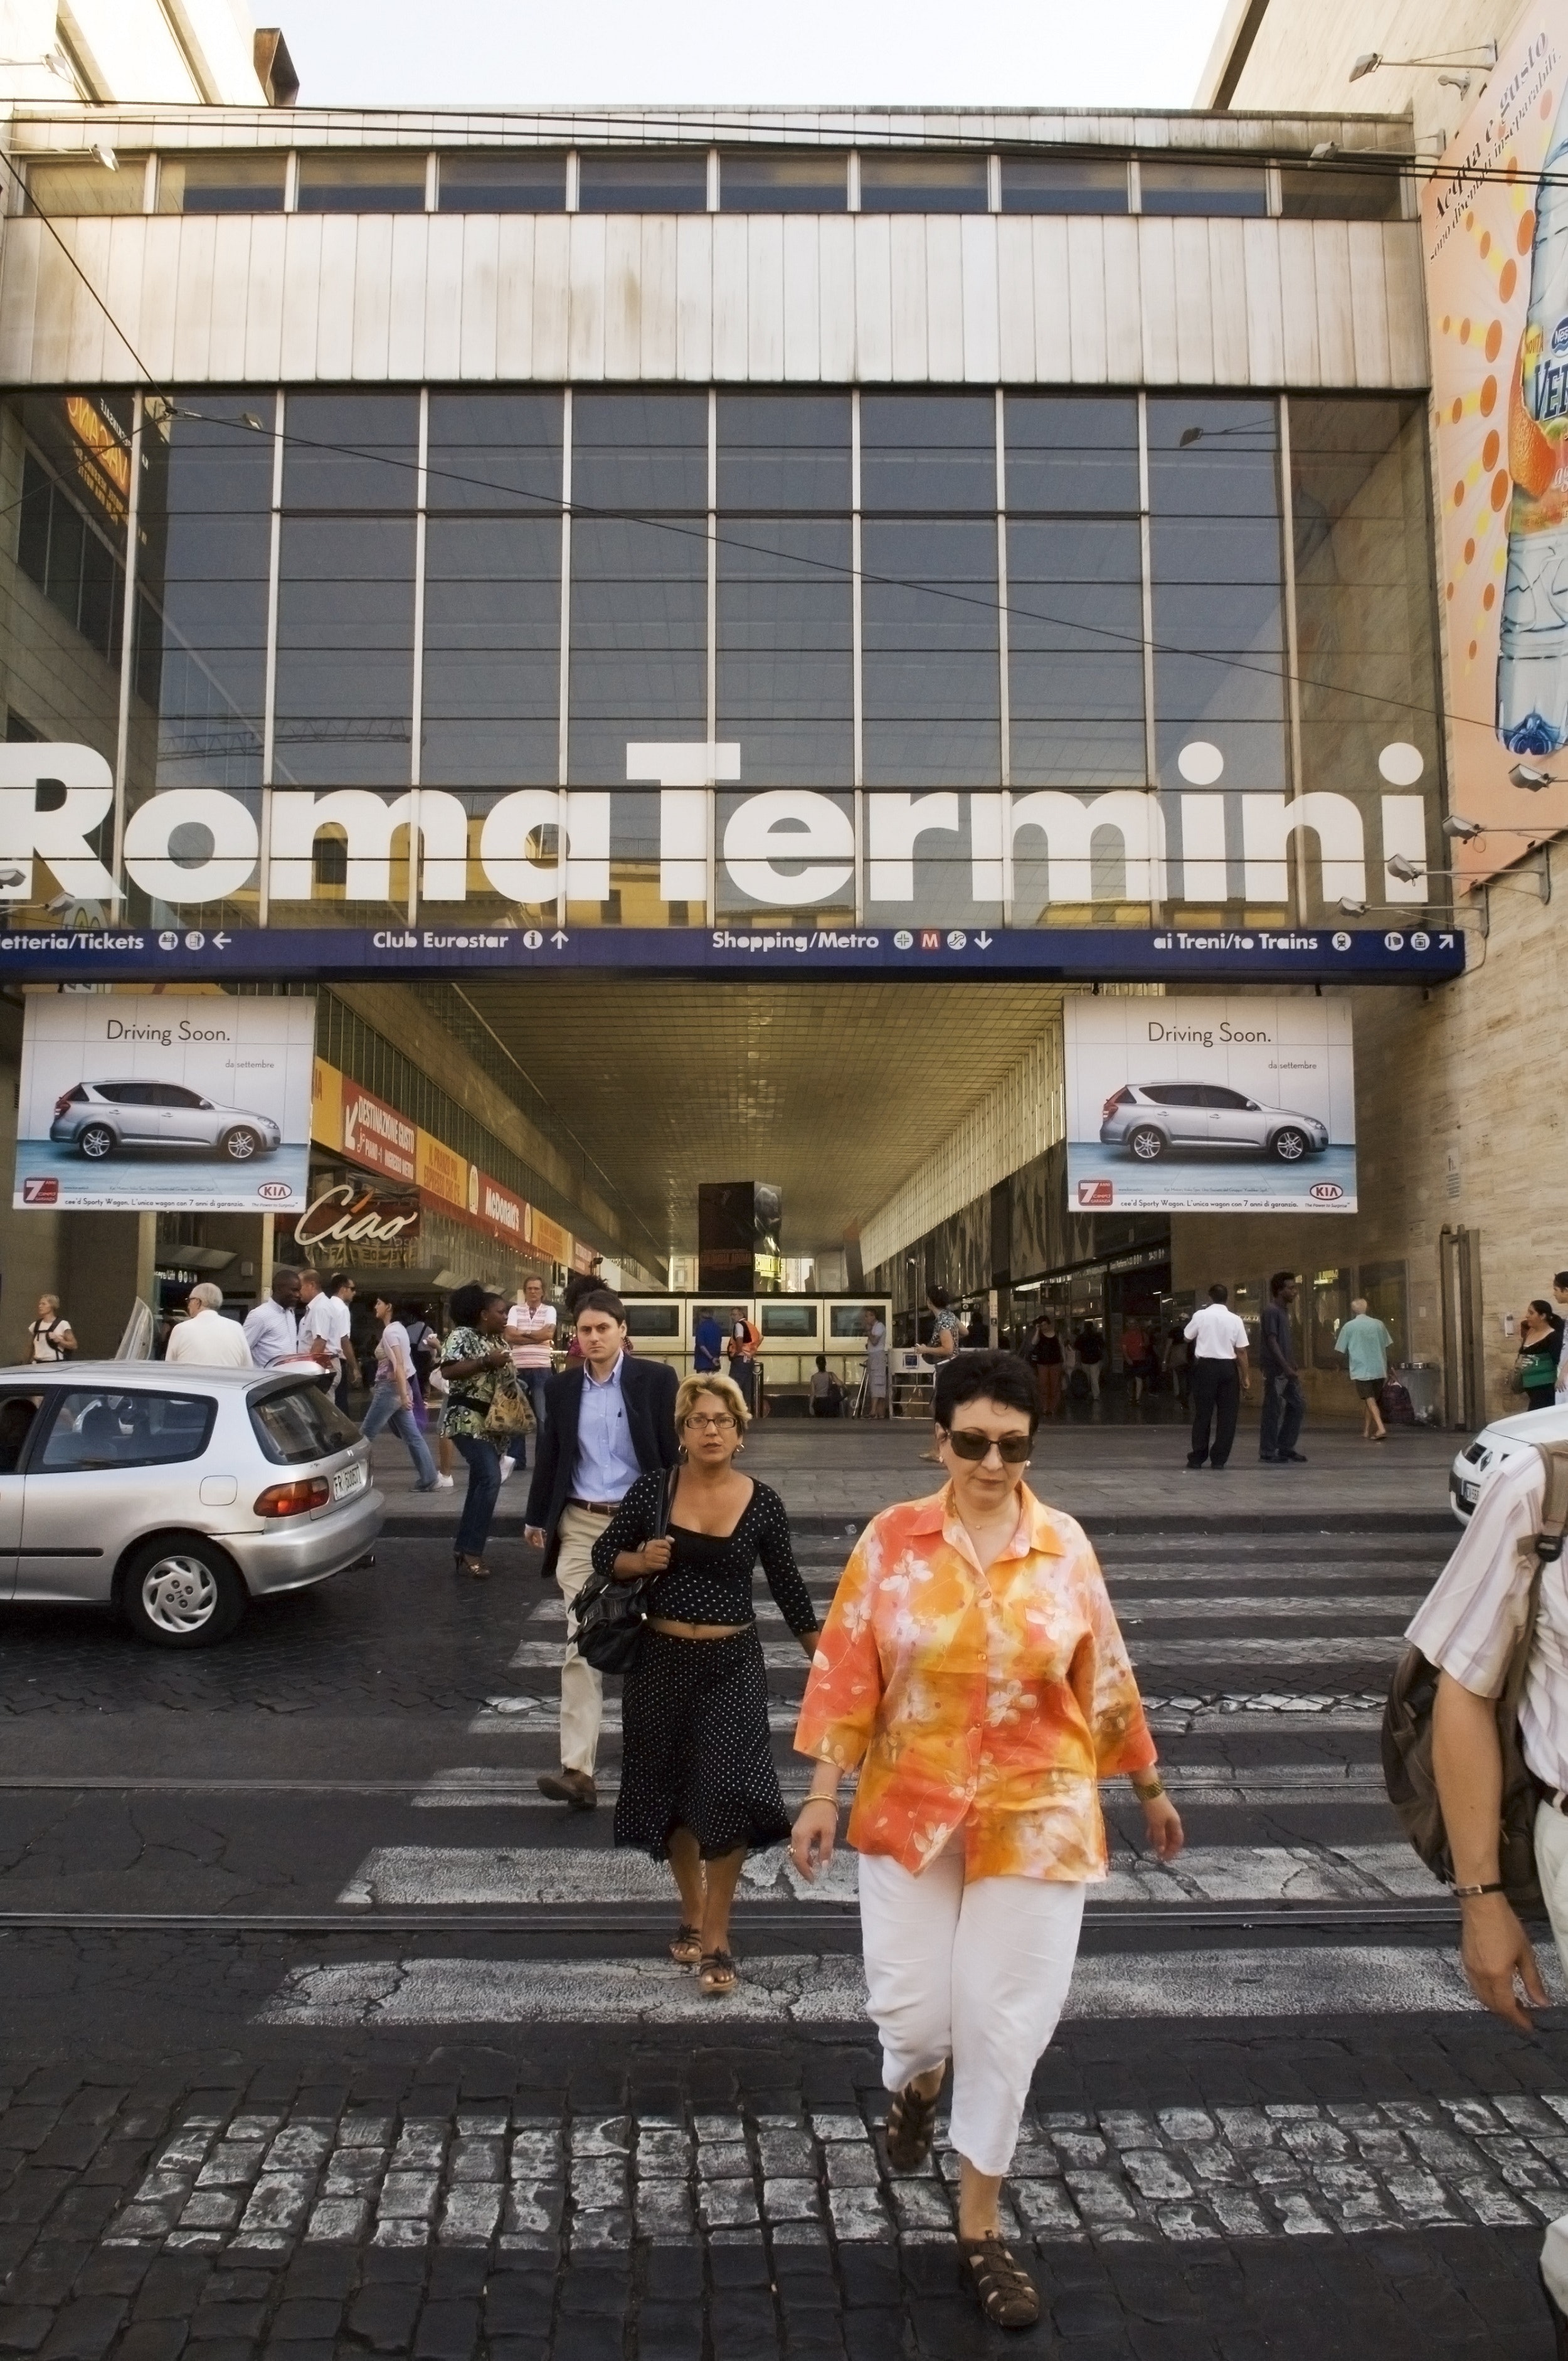 People walk across a zebra crossing in Rome towards the camera; behind them is a large building with huge glass windows with large white letters that read: Roma Termini